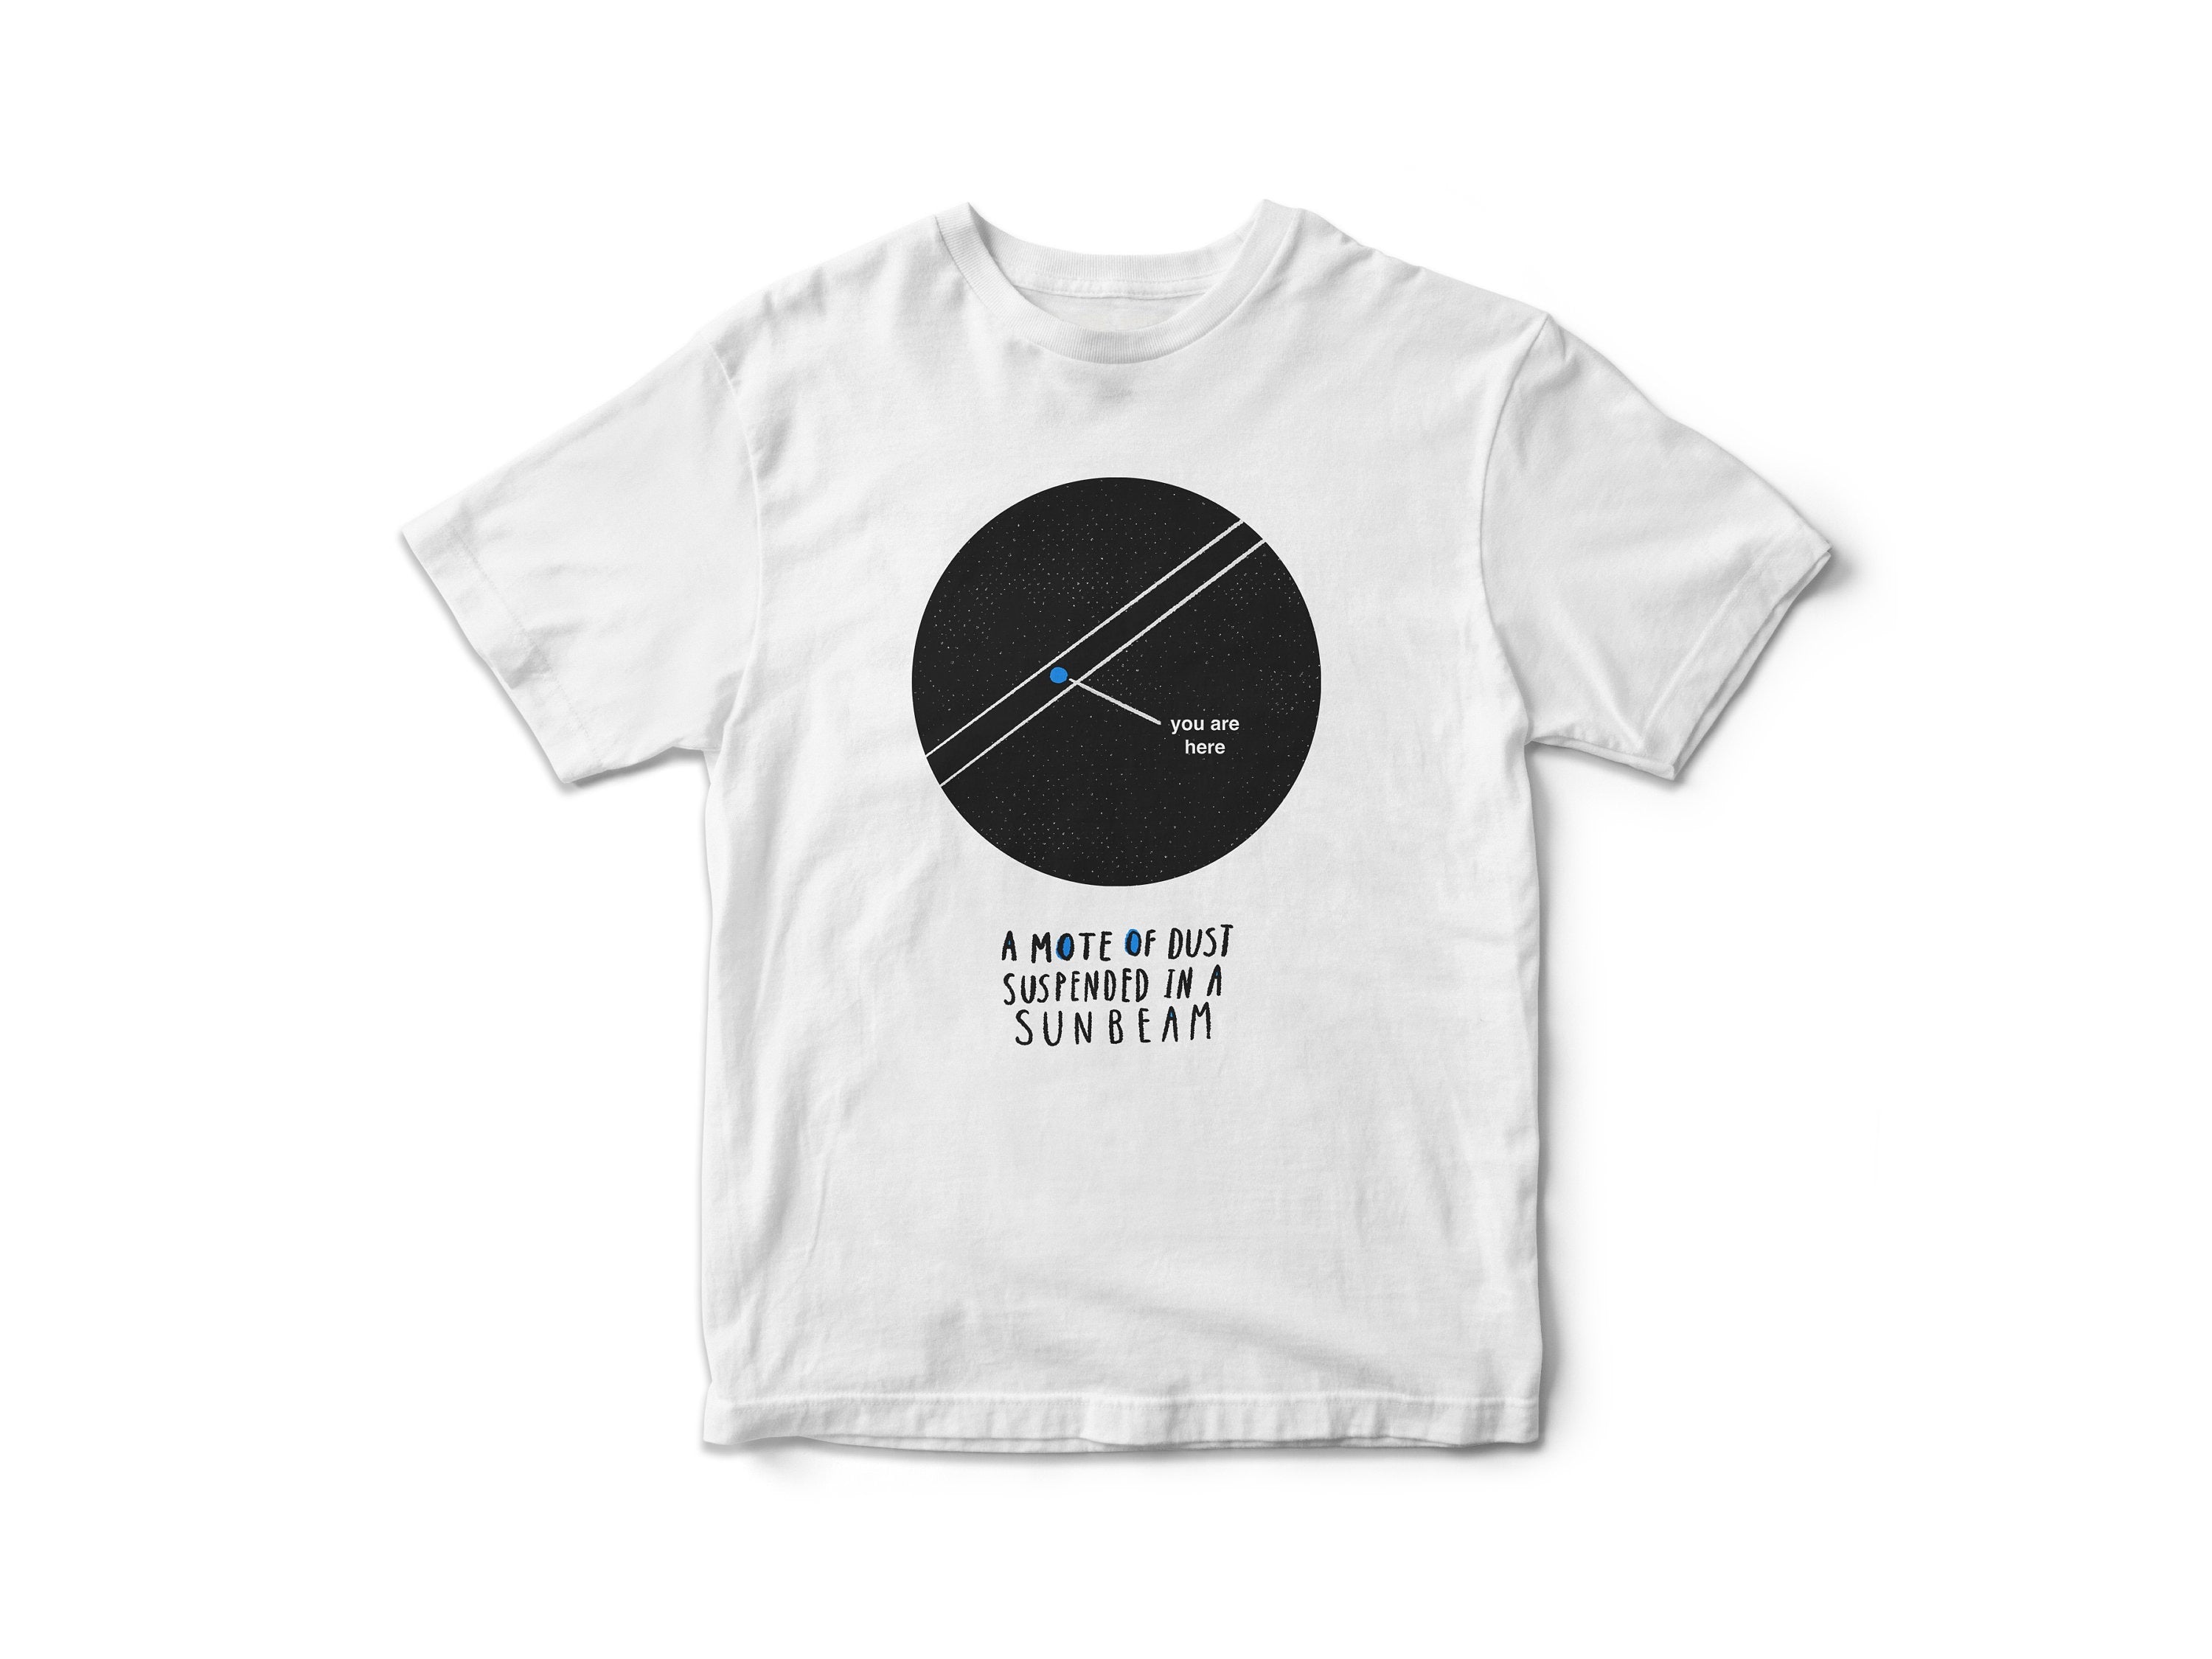 Pale Blue Dot T-Shirt - Mote of Dust T-Shirt - Graphic Space & Astronomy Tee